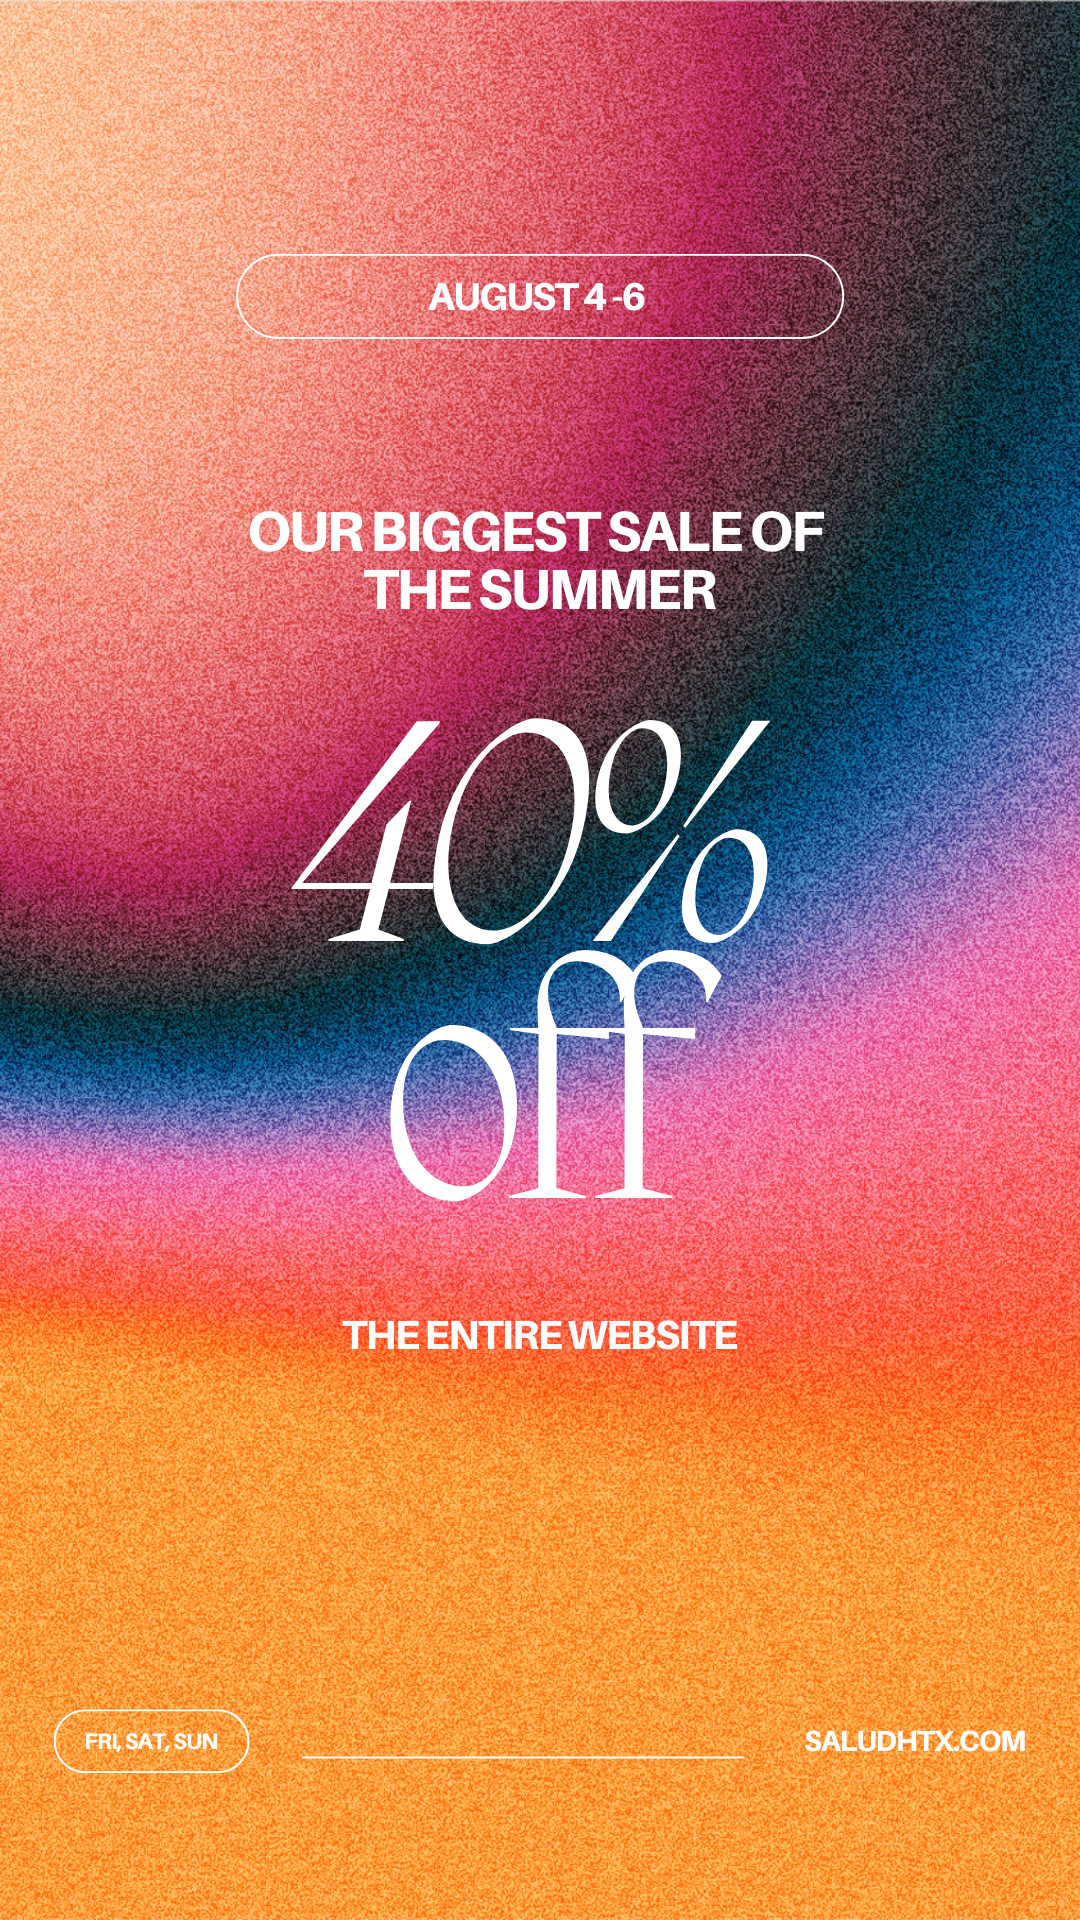 Our Biggest Sale of the Summer is Here